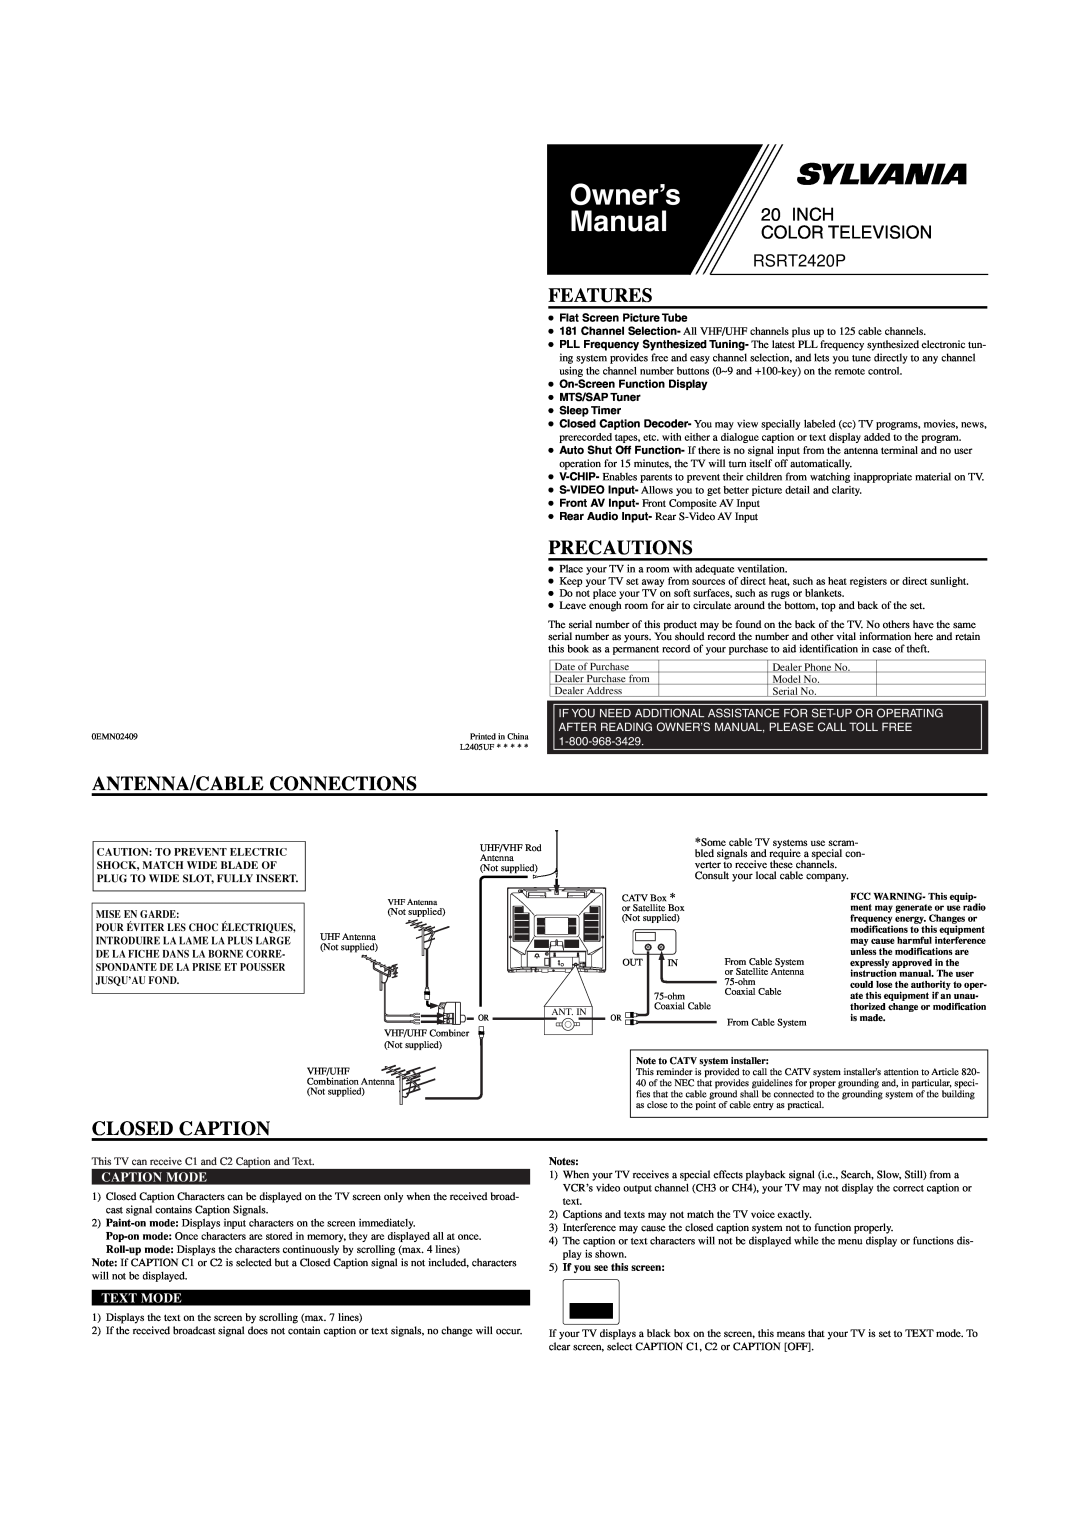 Sylvania owner manual RSRT2420P, Features, Precautions, Antenna/Cable Connections, Closed Caption, Inch, Caption Mode 